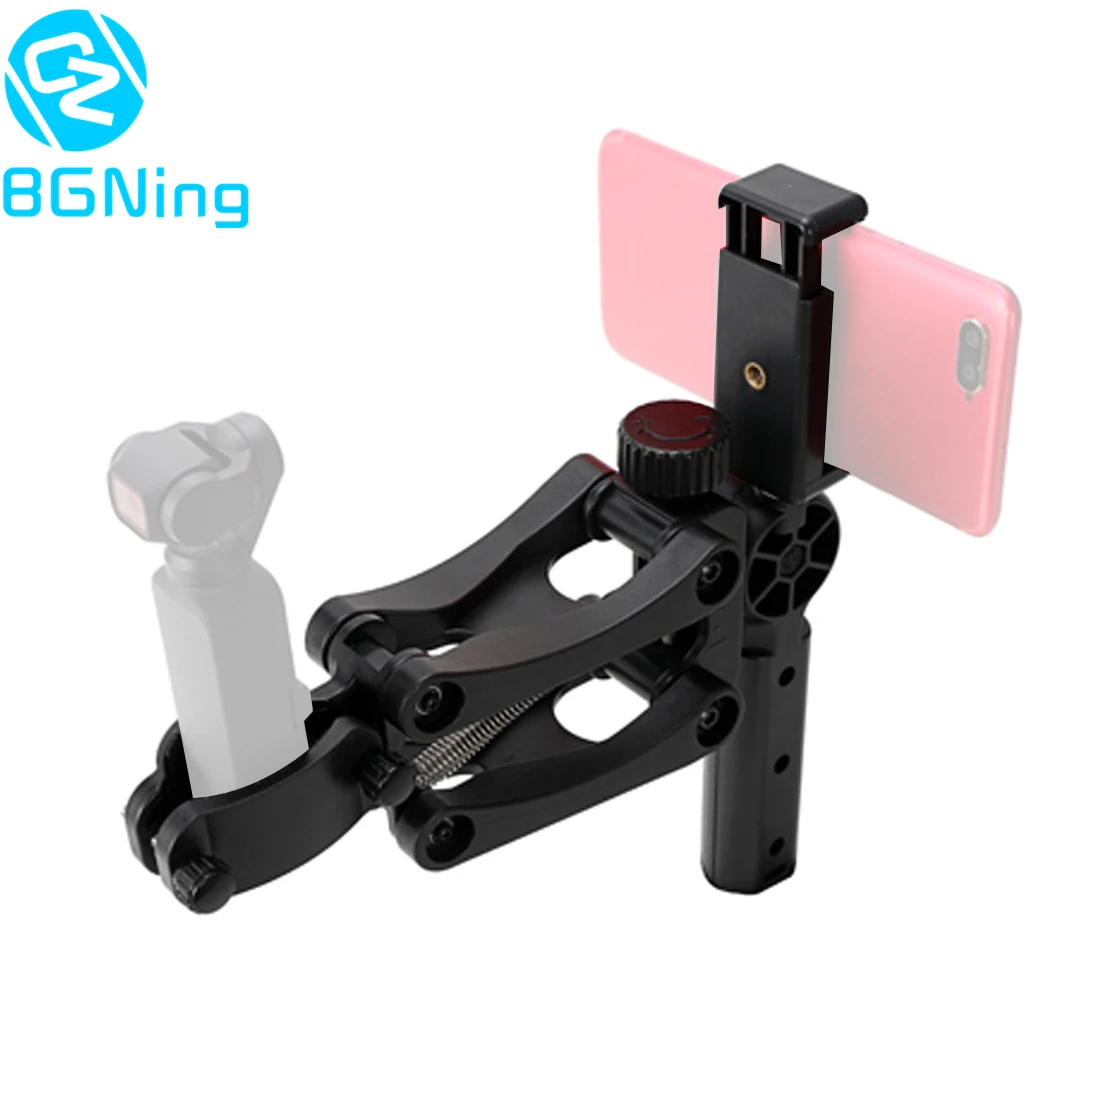 

4-axis Z-axis Stabilizer for DJI OSMO Pocket Smartphone Gimbal Shock Absorber Bracket Expansion Stand Support Holder